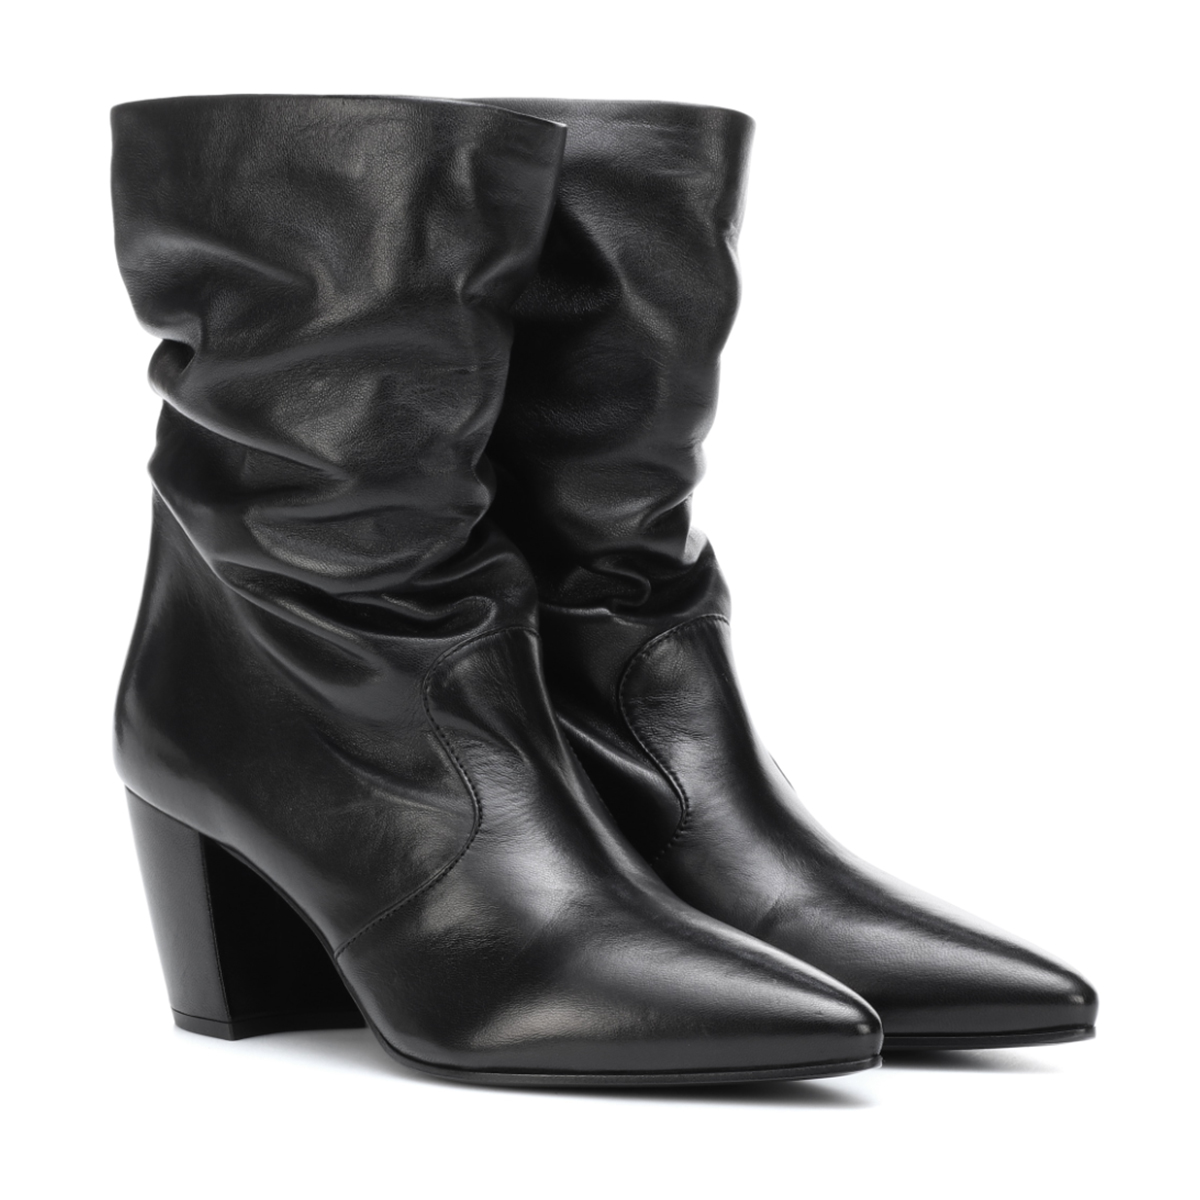 black leather scrunch boots